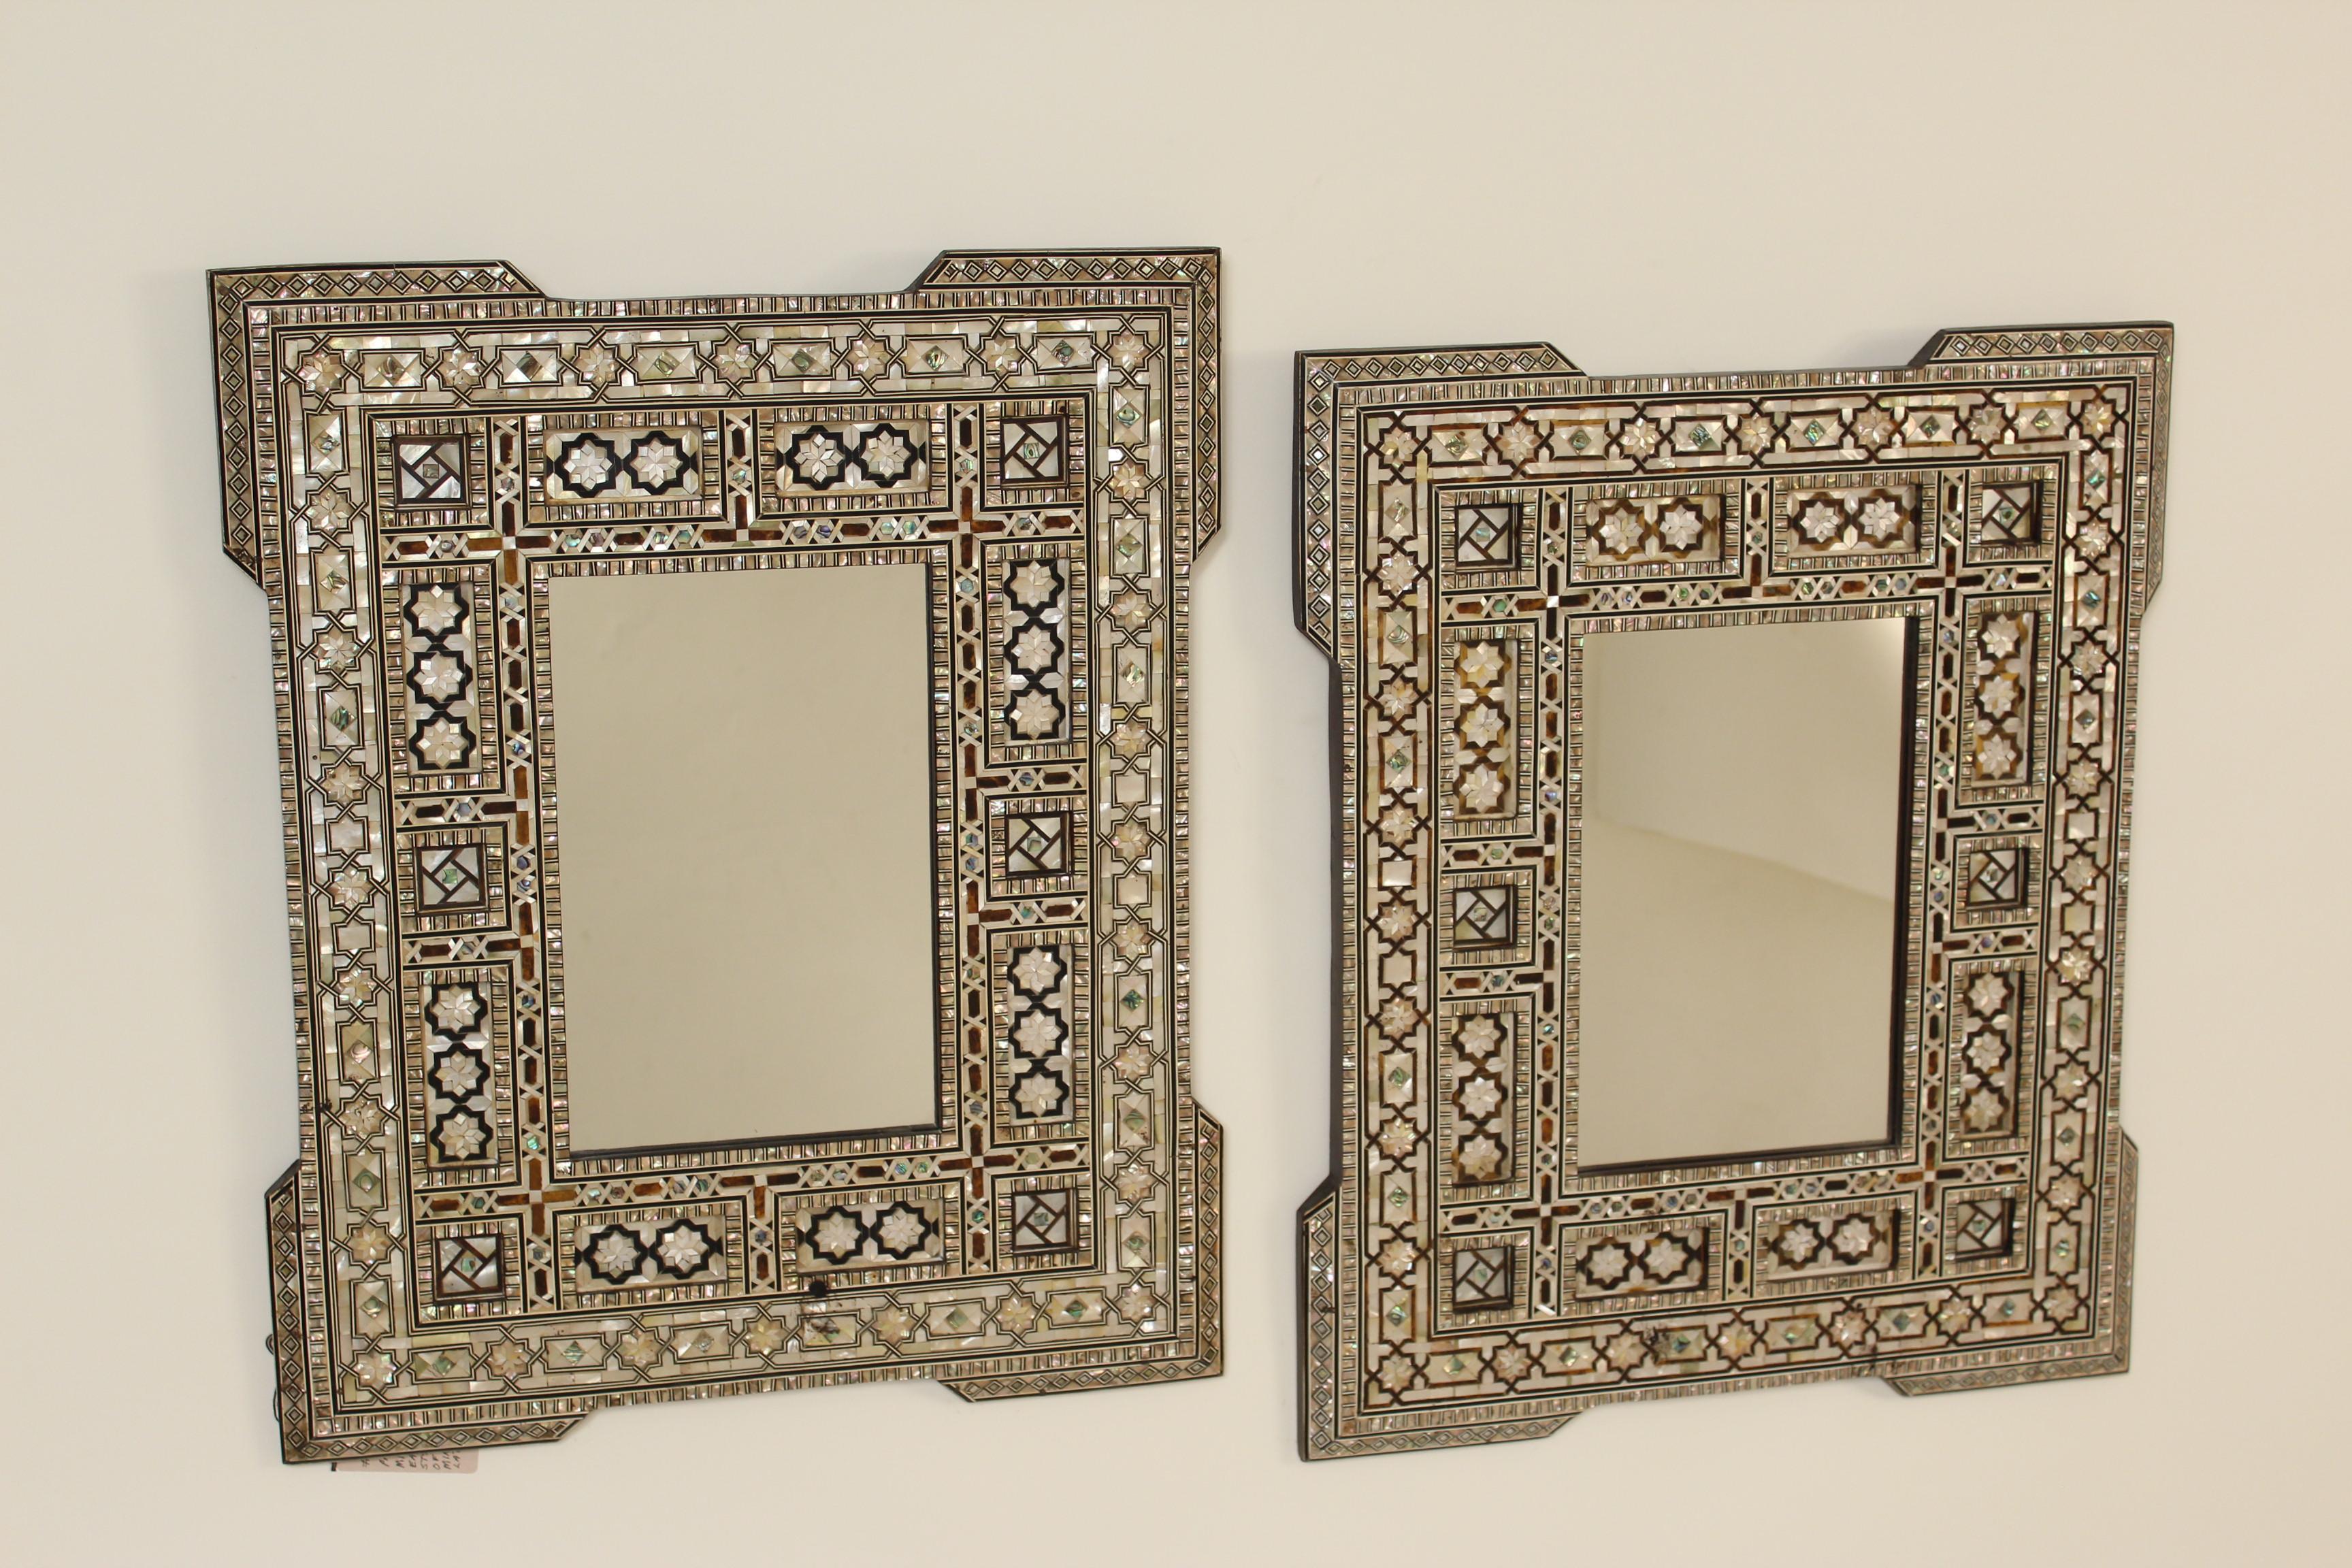 Pair of mother-of-pearl inlaid Middle Eastern mirrors, late 20th century.